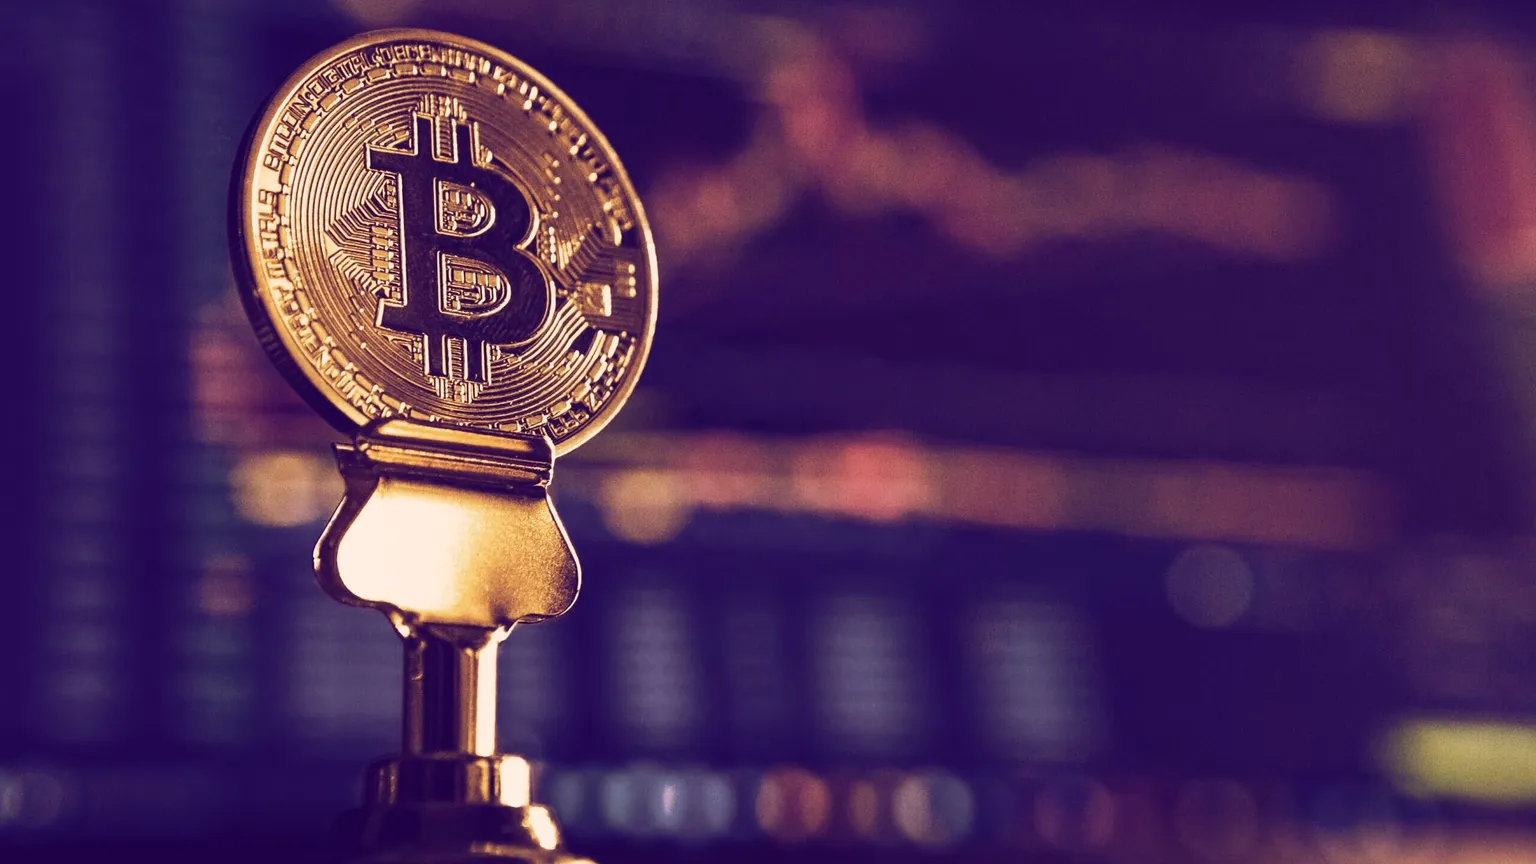 Bitcoin can be valued at $500,000 apiece, say Gemini founders. Image: Unsplash